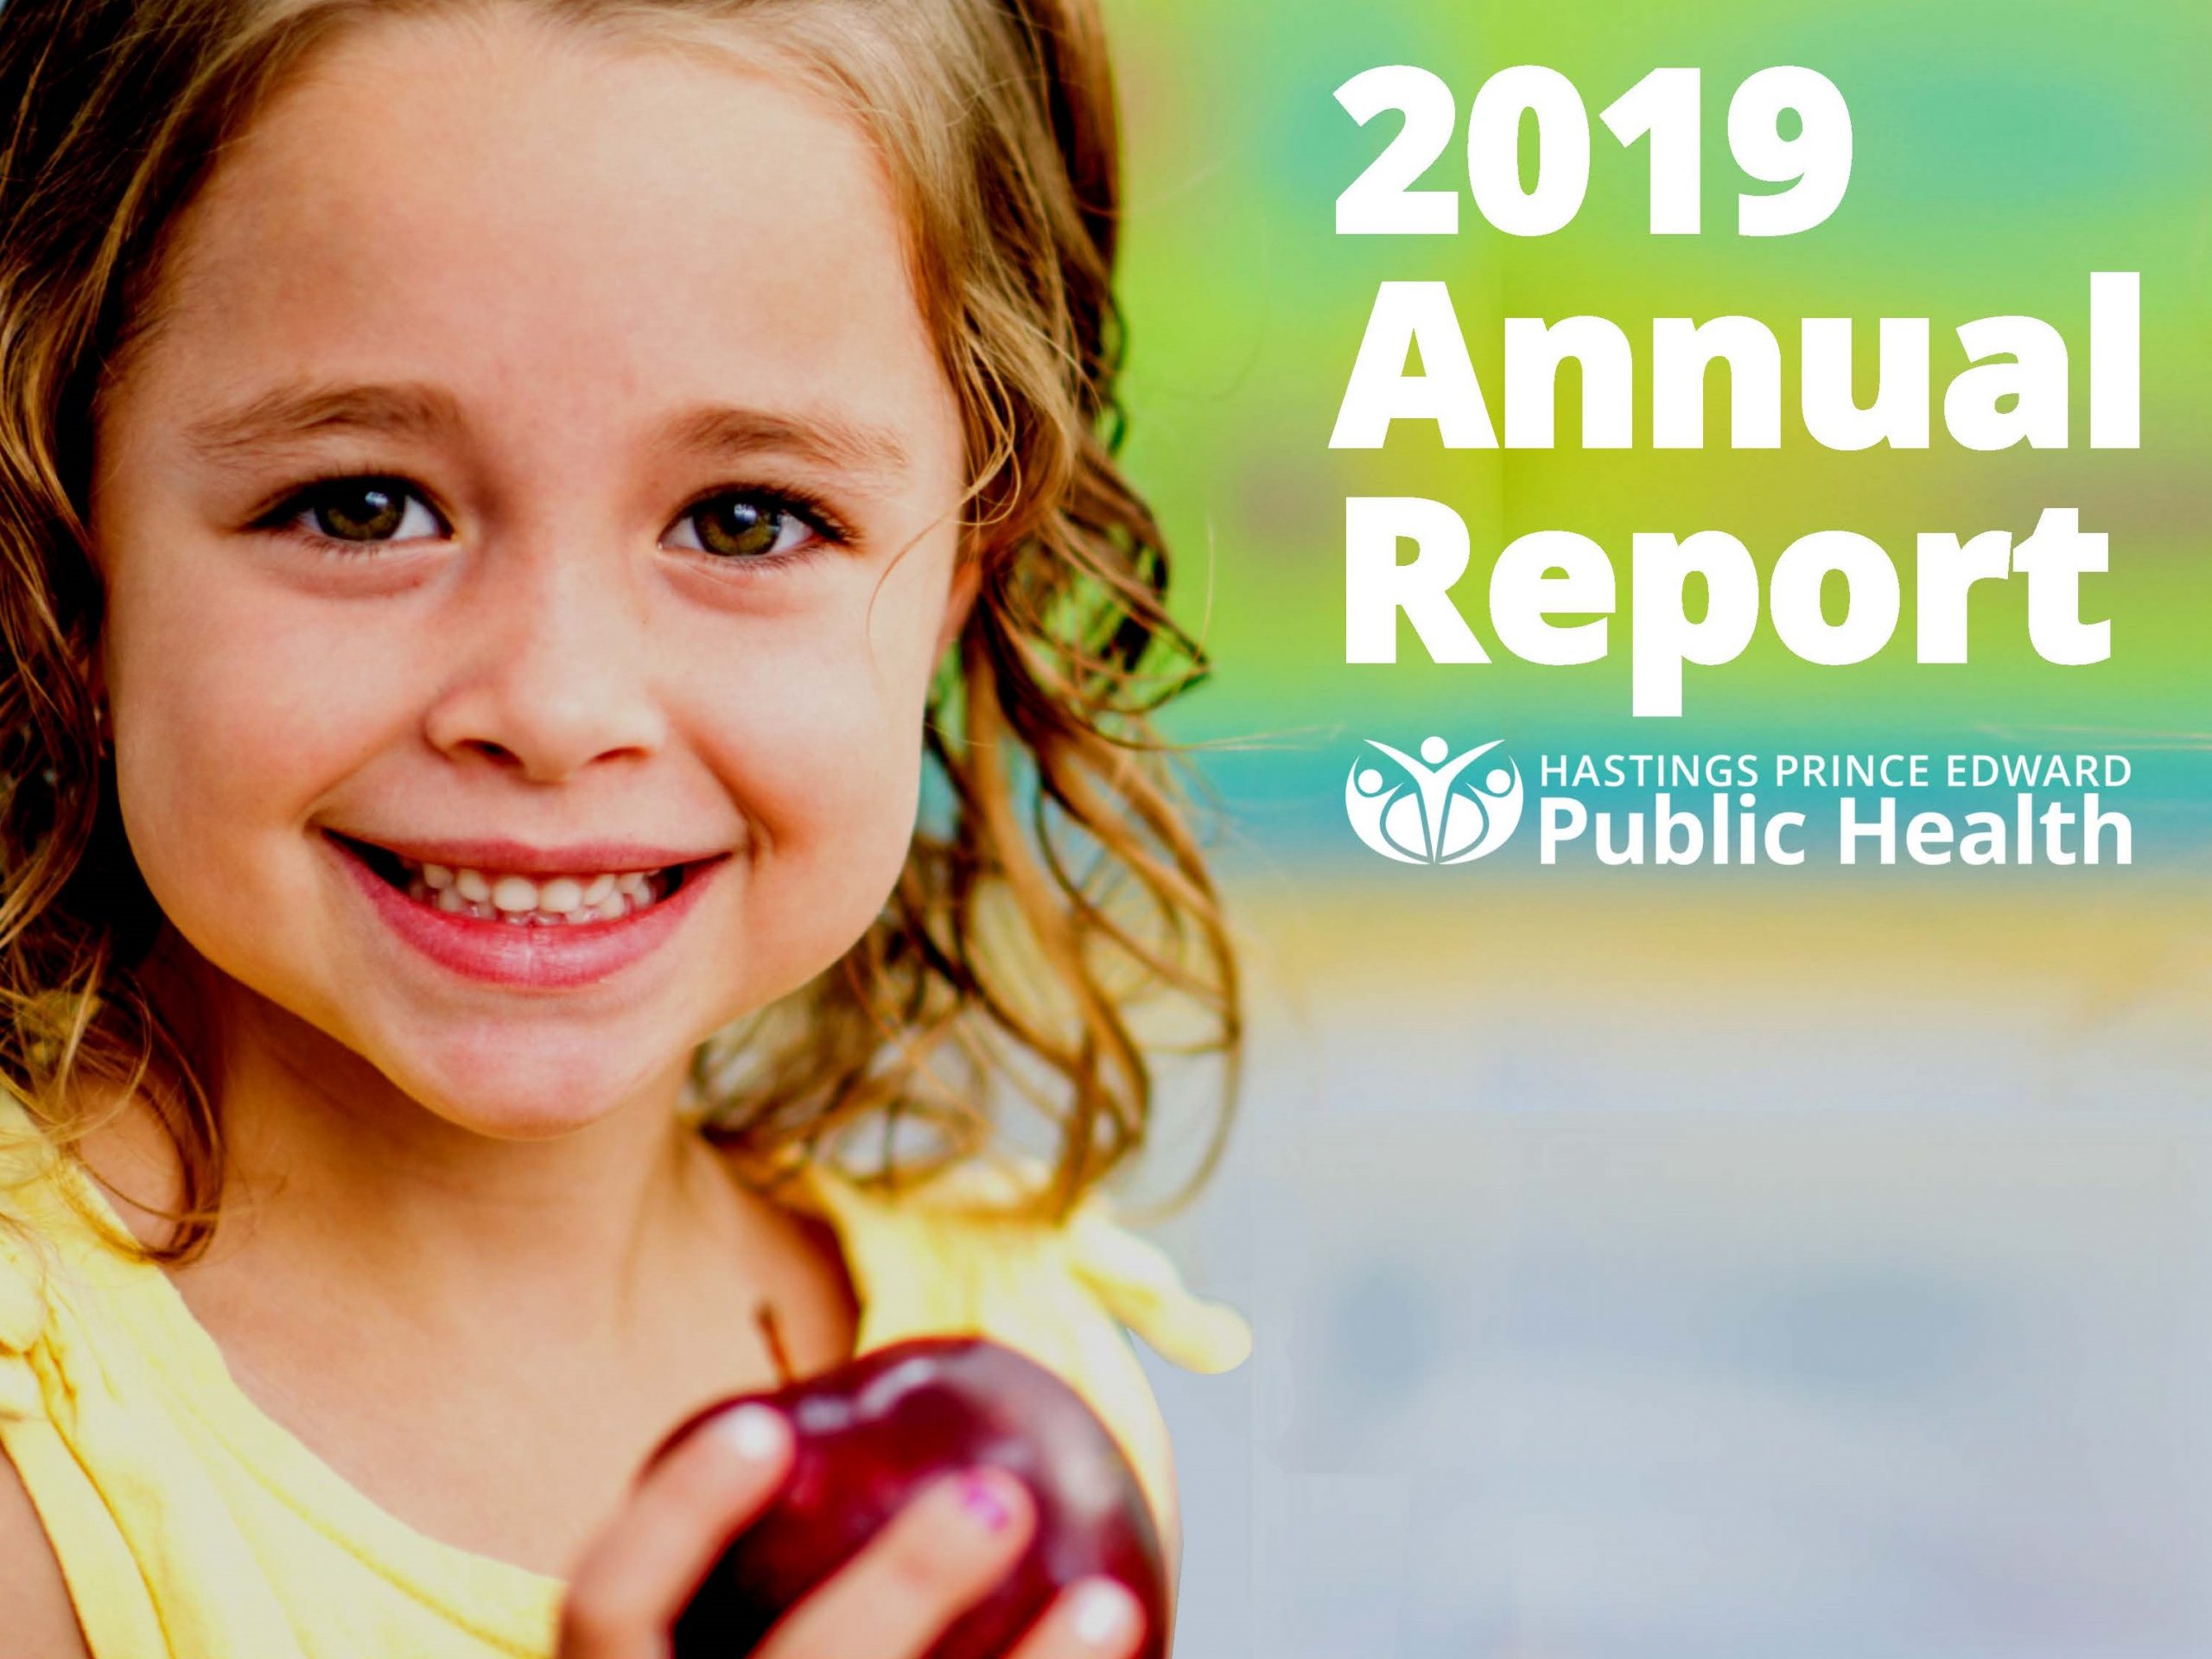 2019 Annual Report - Hastings Prince Edward Public Health